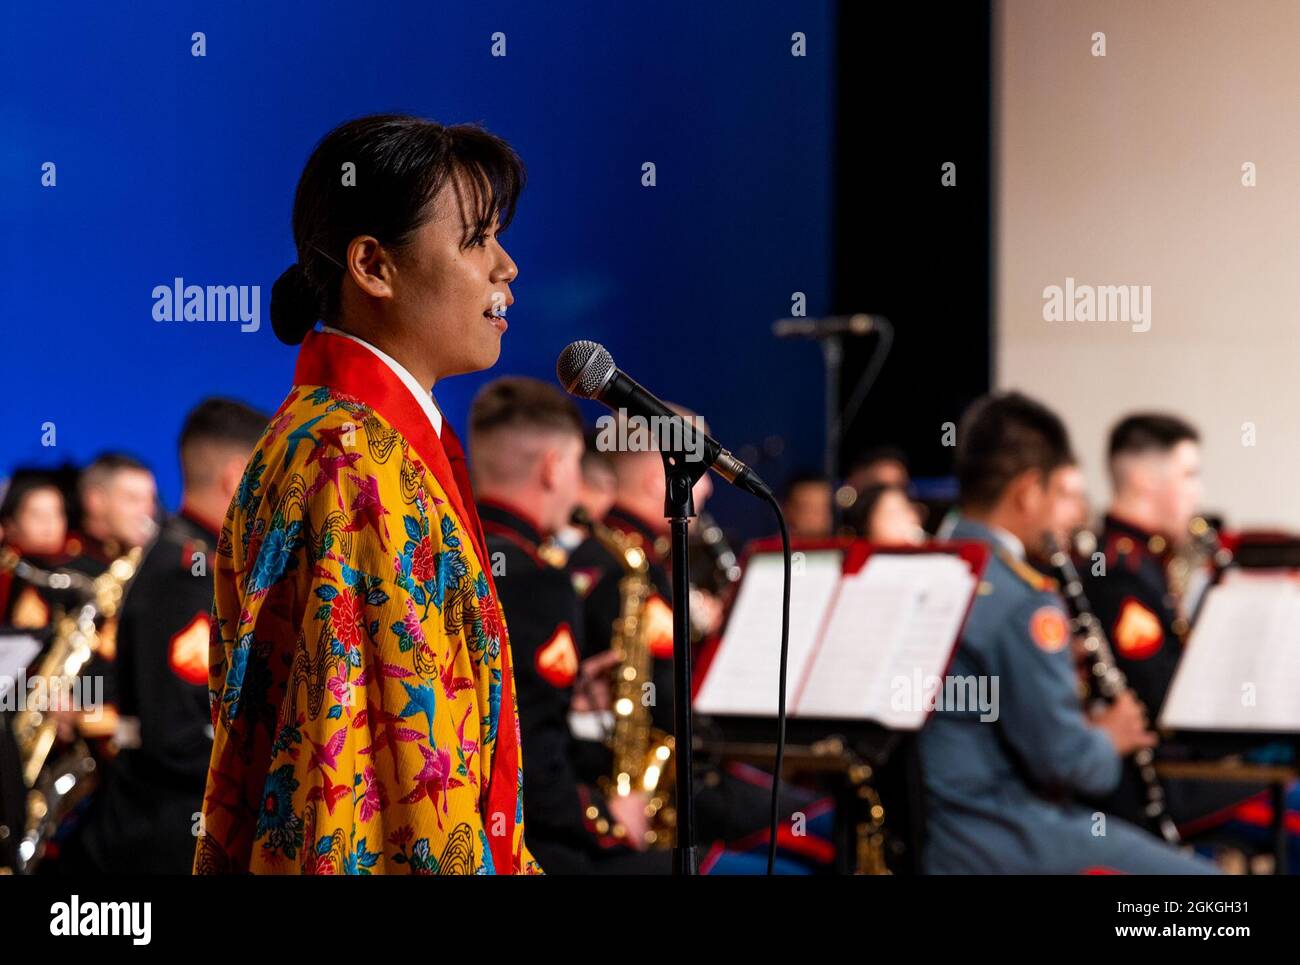 Japan Ground Self-Defense Force (JGSDF) Sgt. Mio Sakuma, a french horn player with the JGSDF 15th Brigade band sings “Bashofu Bossa Nova,” an Okinawan folk song during the spring concert in Tedako Hall in Urasoe, Okinawa, Japan, April 16, 2021. The bands' harmonious performance was a display of the III Marine Expeditionary Force and 15th Brigade bands' alliance and unity within the musical arts. The annual concert was performed virtually and the recording will debut on social media platforms within the coming weeks. Sakuma is a native of Fukuoka. Stock Photo